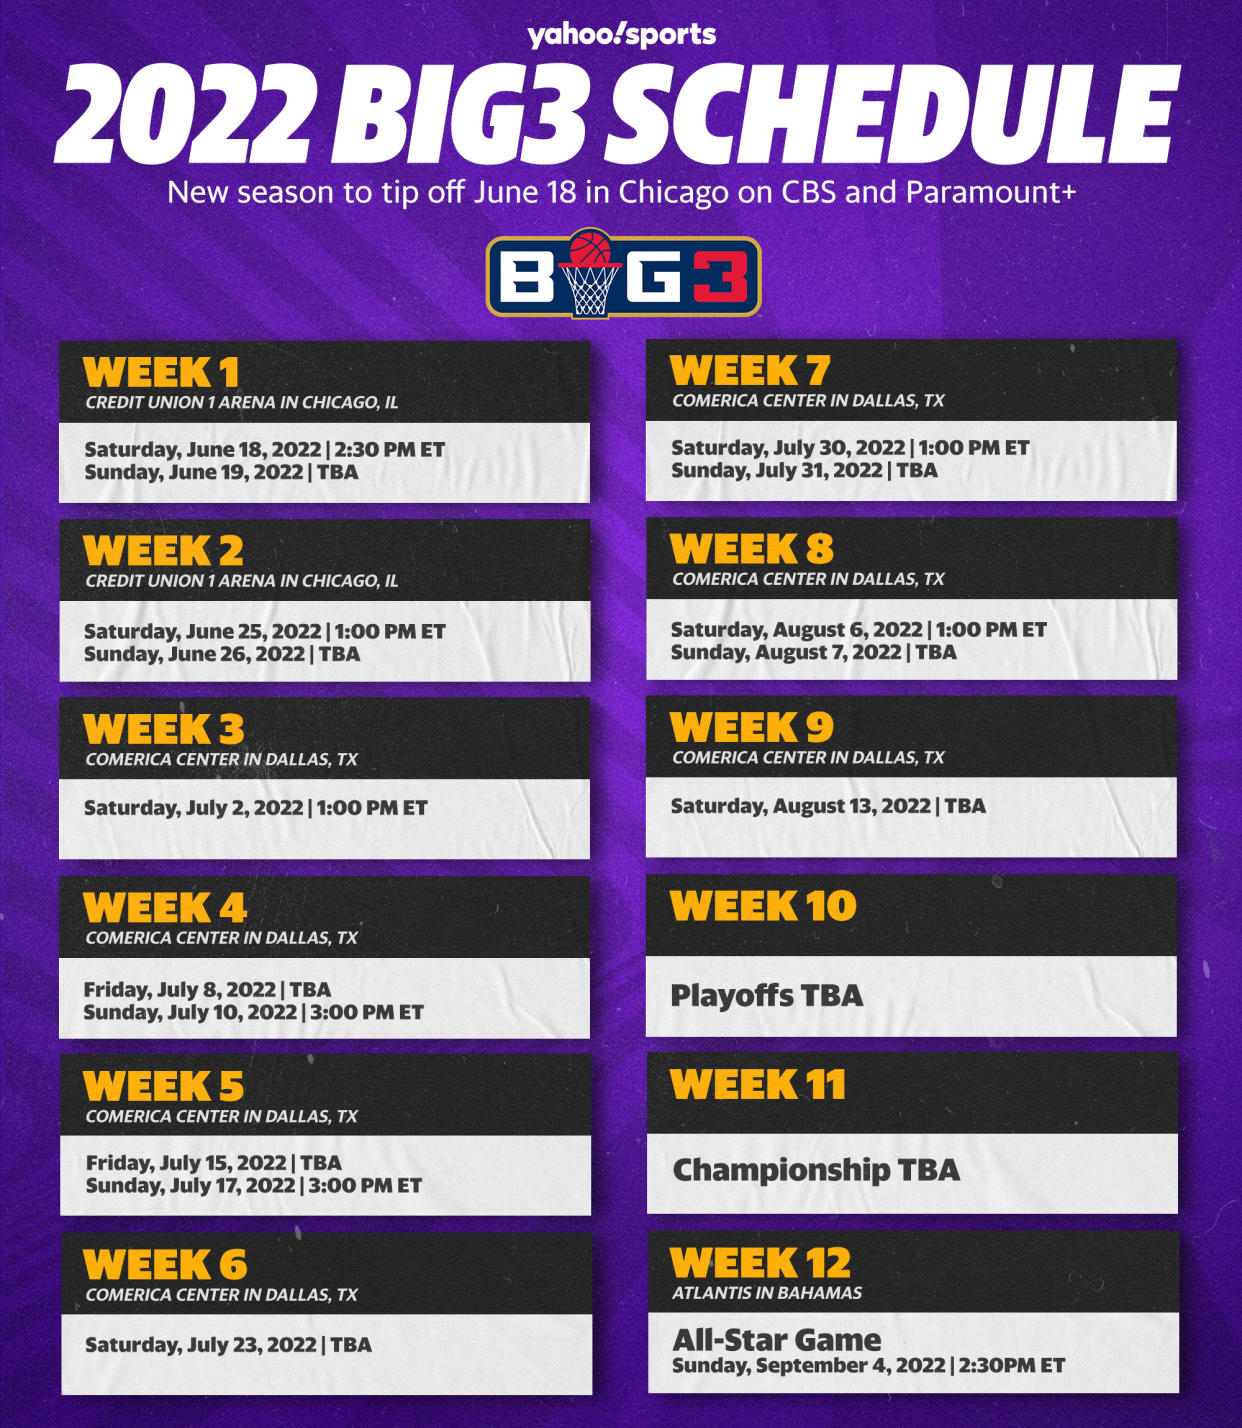 The 2022 BIG3 season will feature games over 12 weeks in Chicago and Dallas, and include an All-Star Game for the first time. (Graphic by Amber Matsumoto/Yahoo Sports)